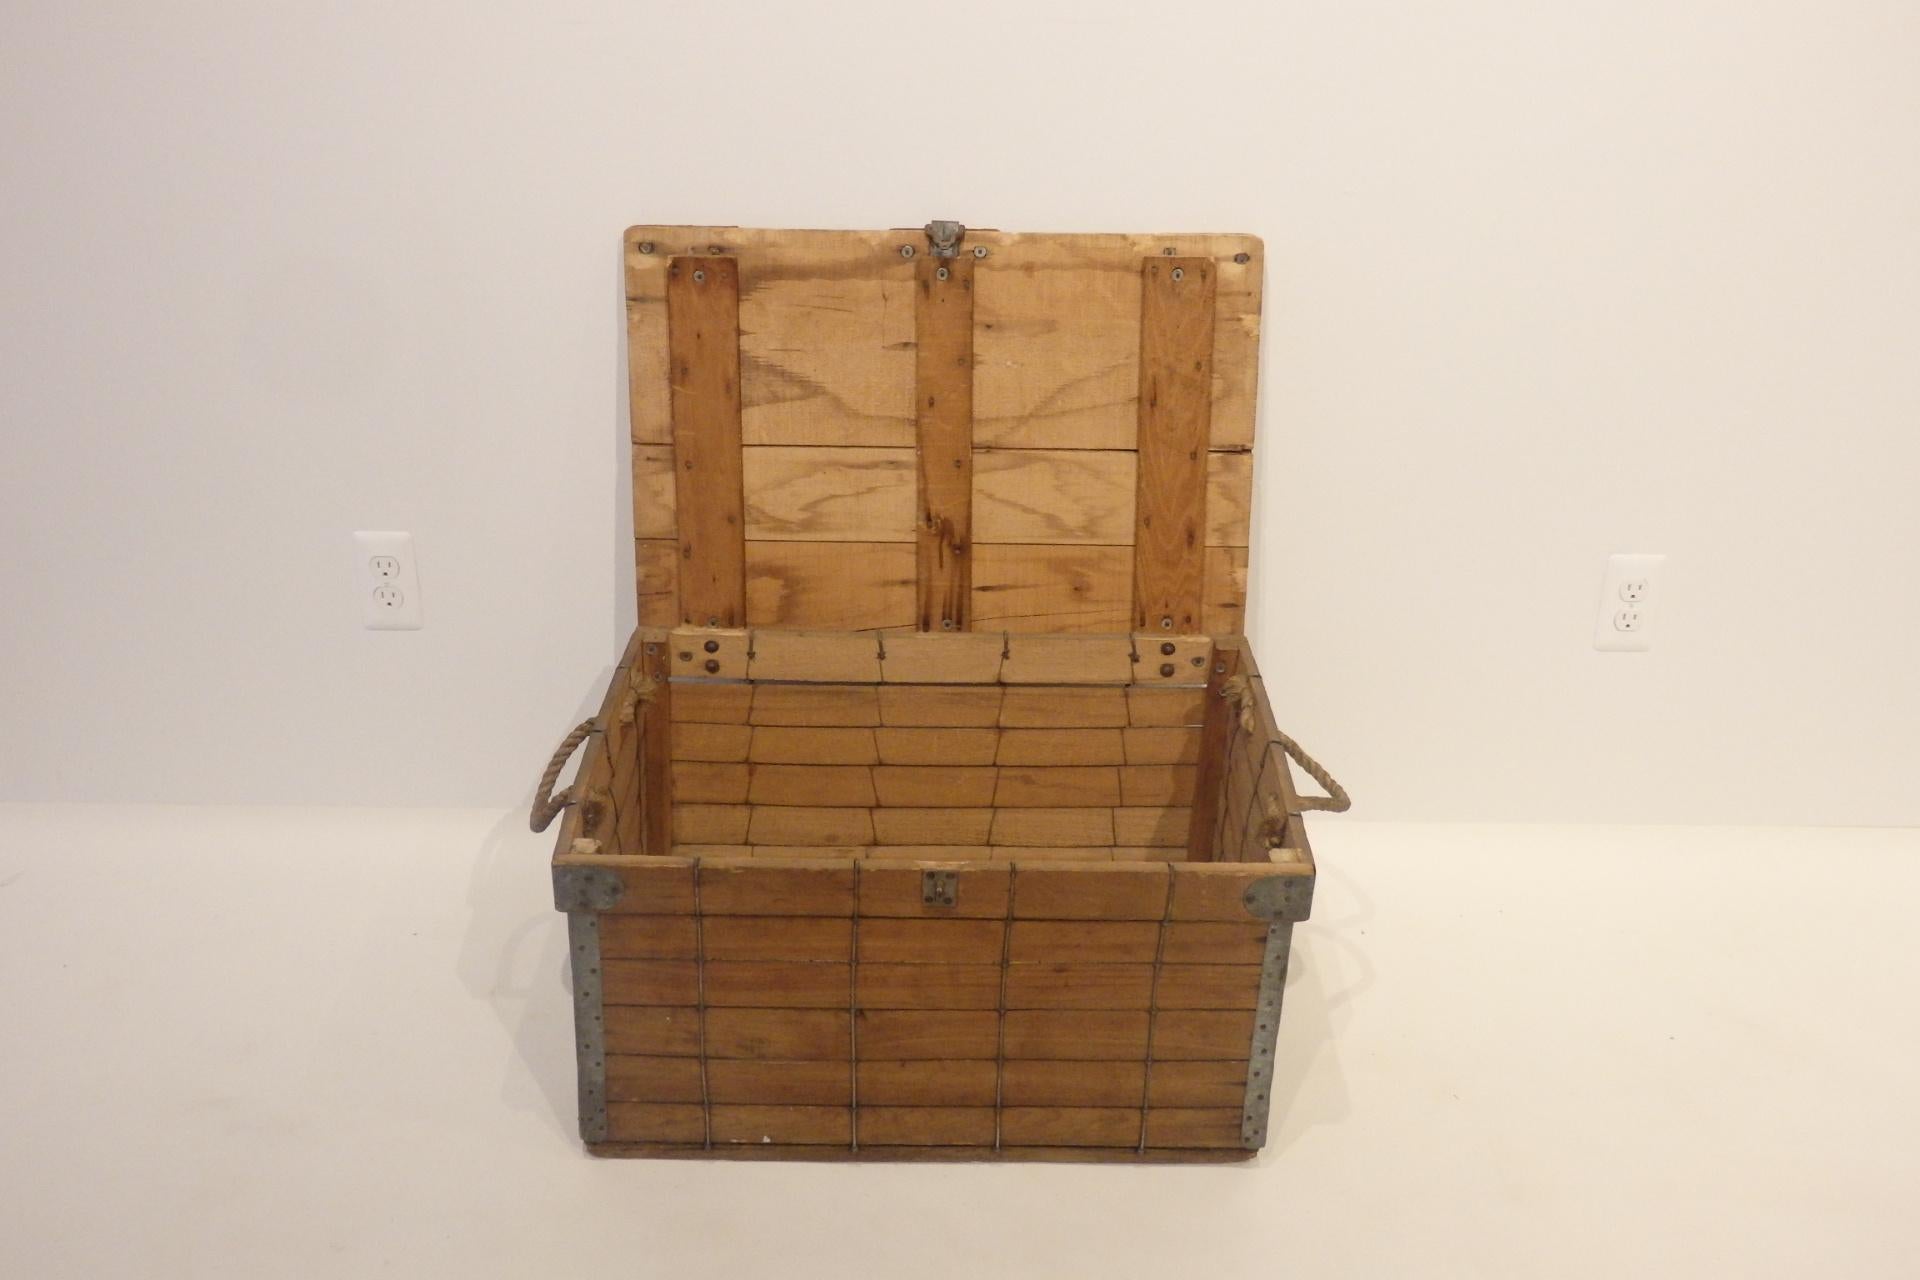 1940s Folk Art Wire with Slatted Wood Lidded Box or Storage Trunk In Good Condition For Sale In Ferndale, MI